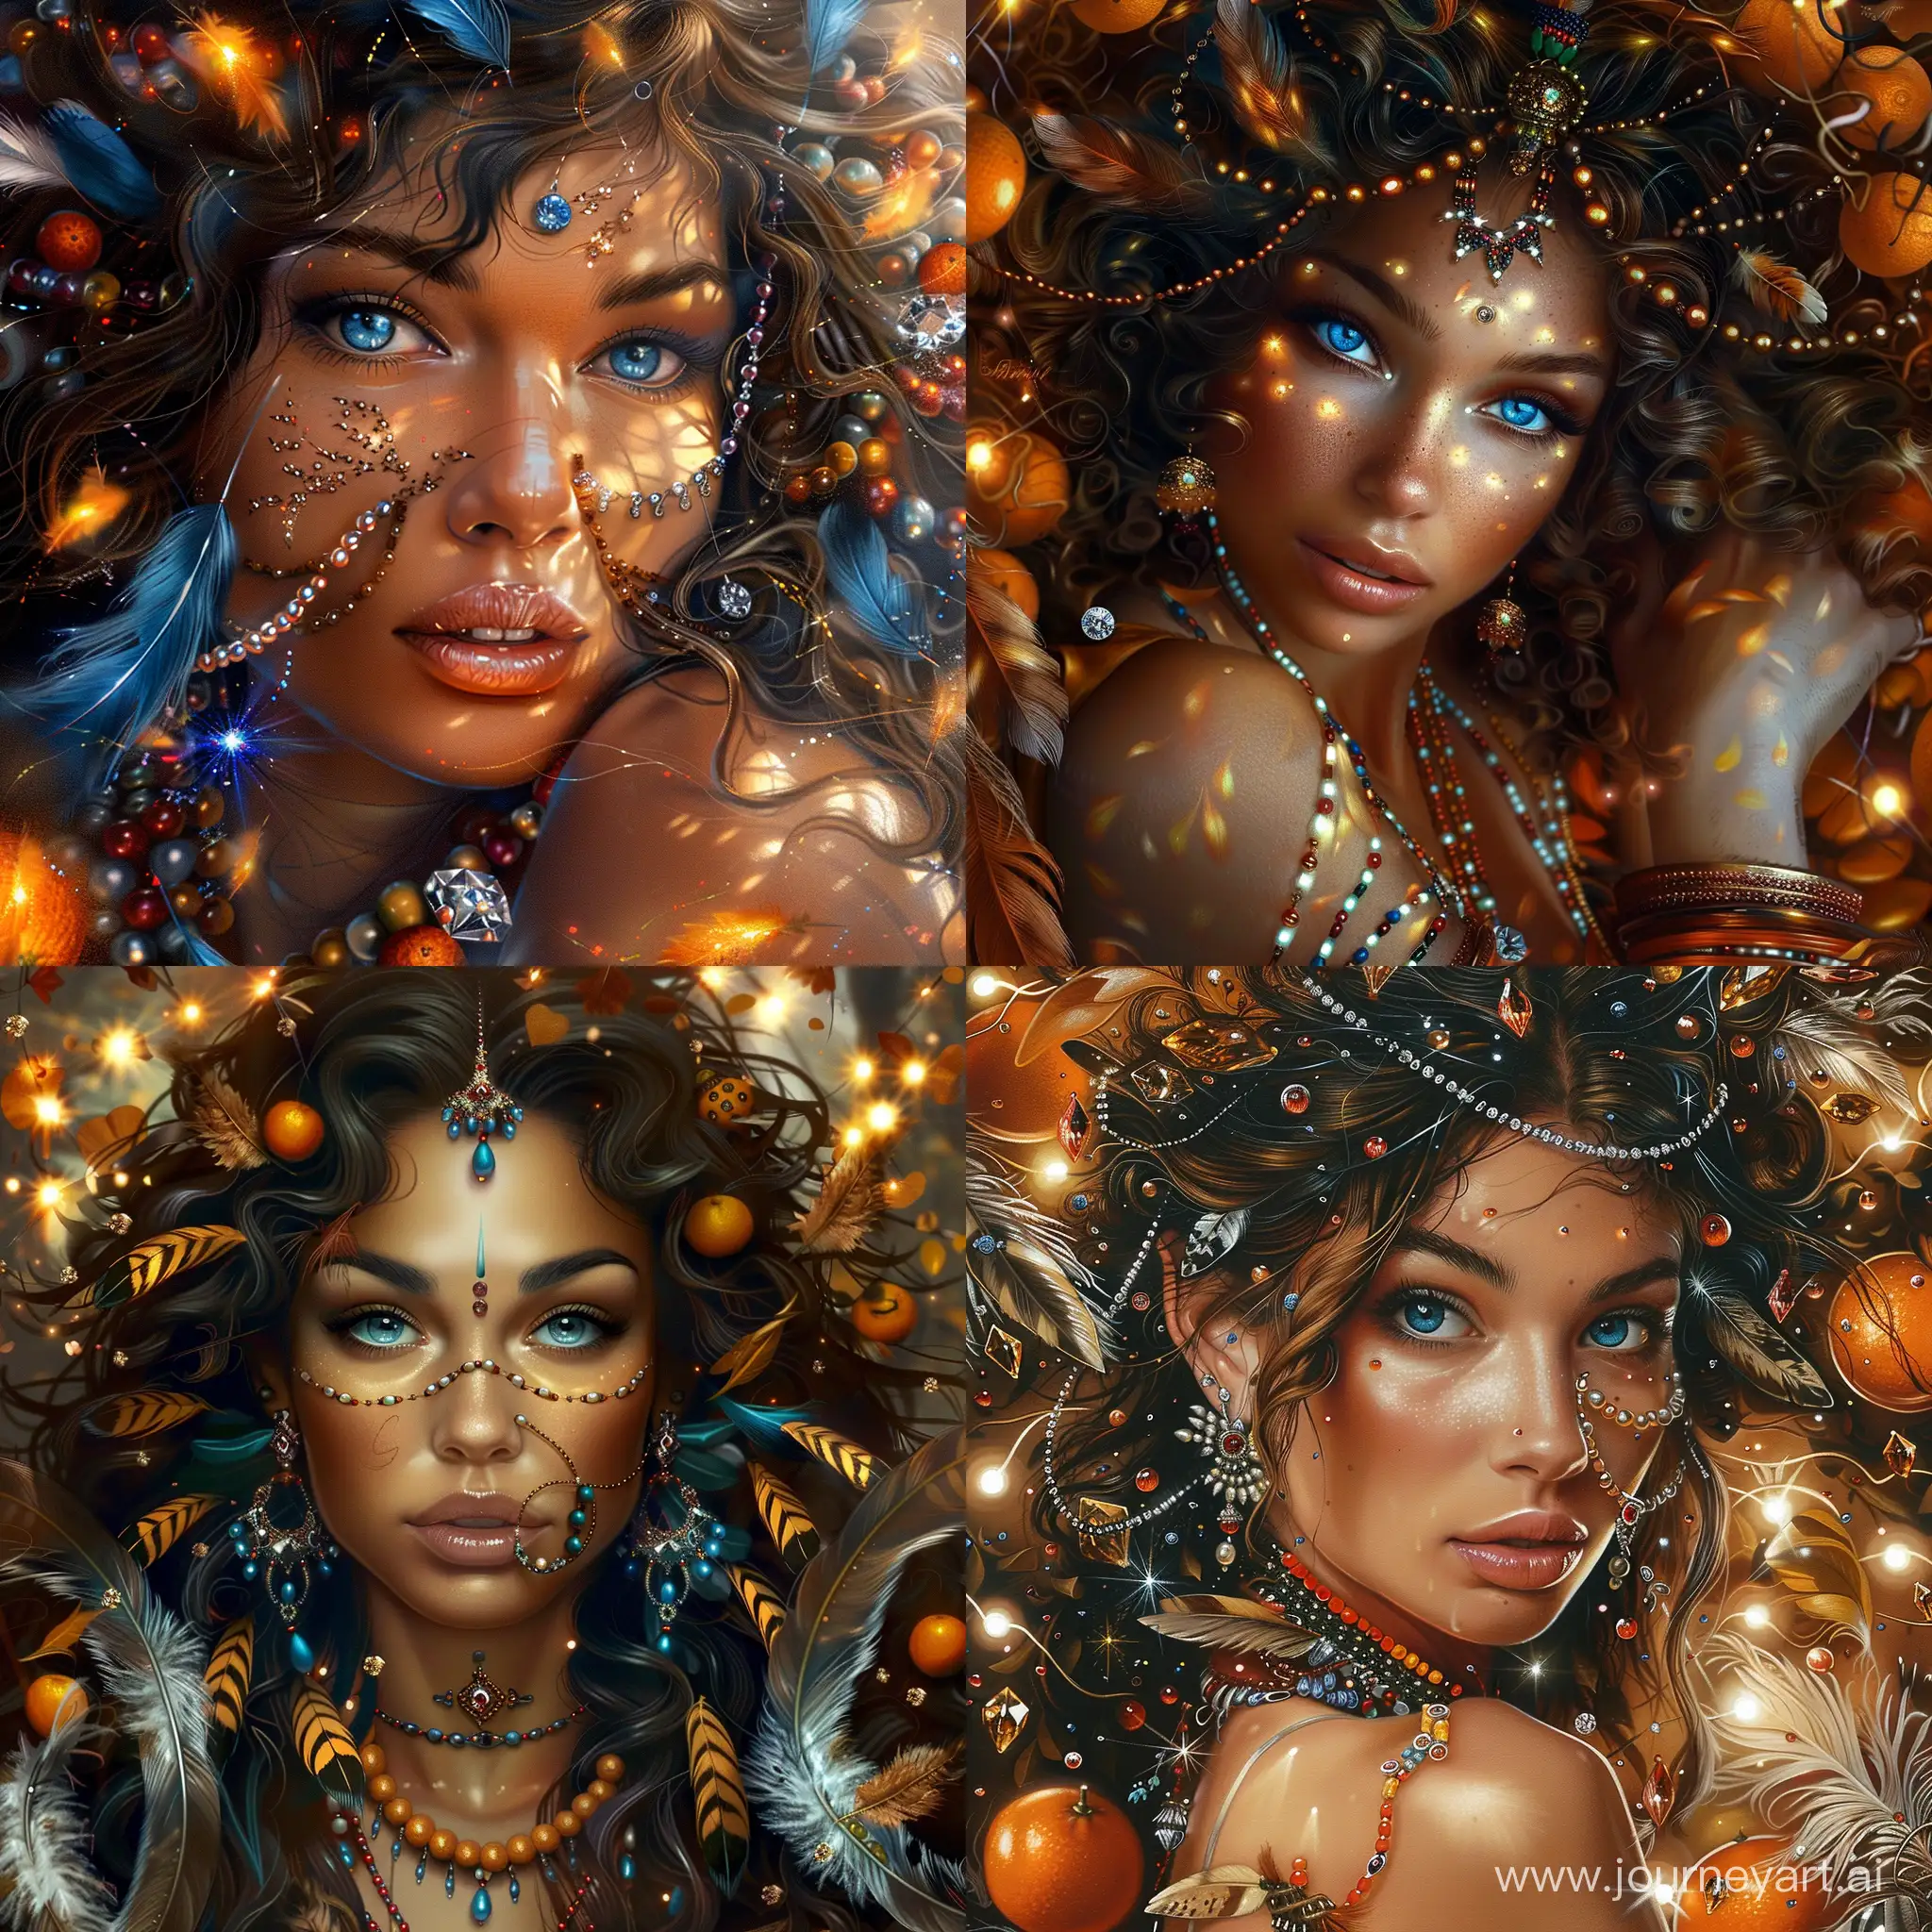 Indian-Woman-with-Blue-Eyes-Adorned-in-Feathers-and-Beads-Amidst-Glowing-Lights-and-Oranges